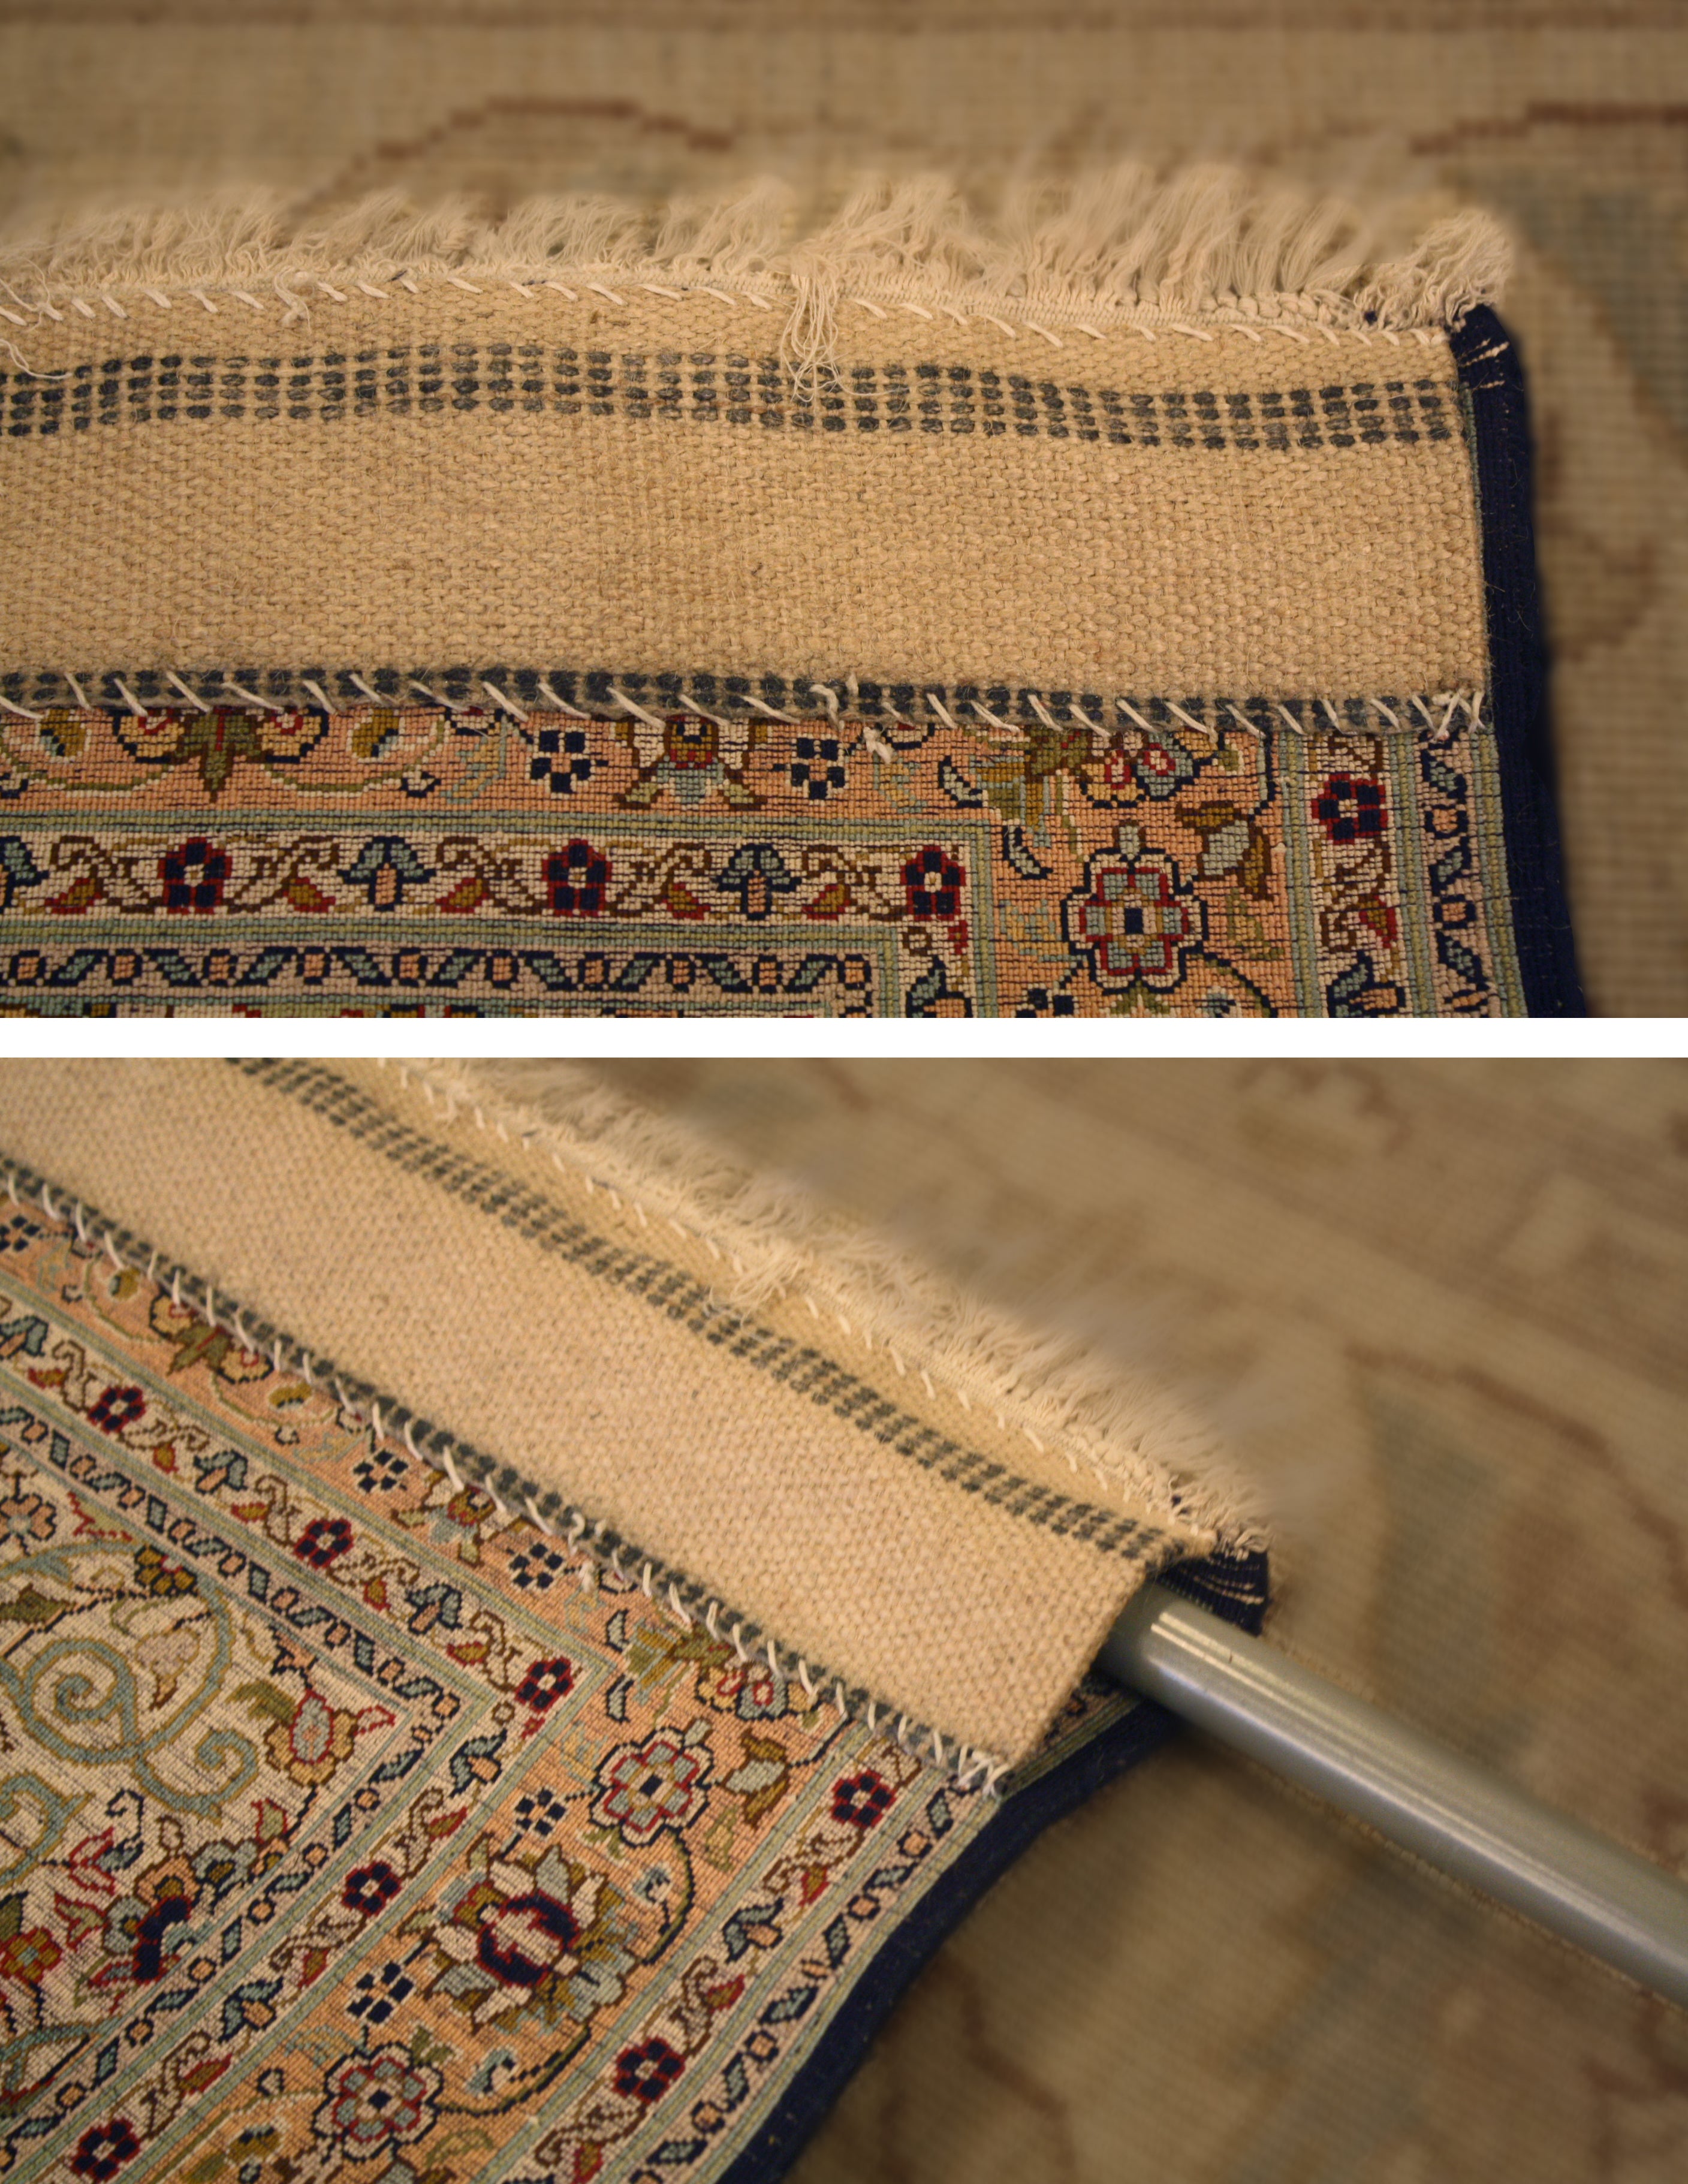 How to Hang A Rug on the Wall